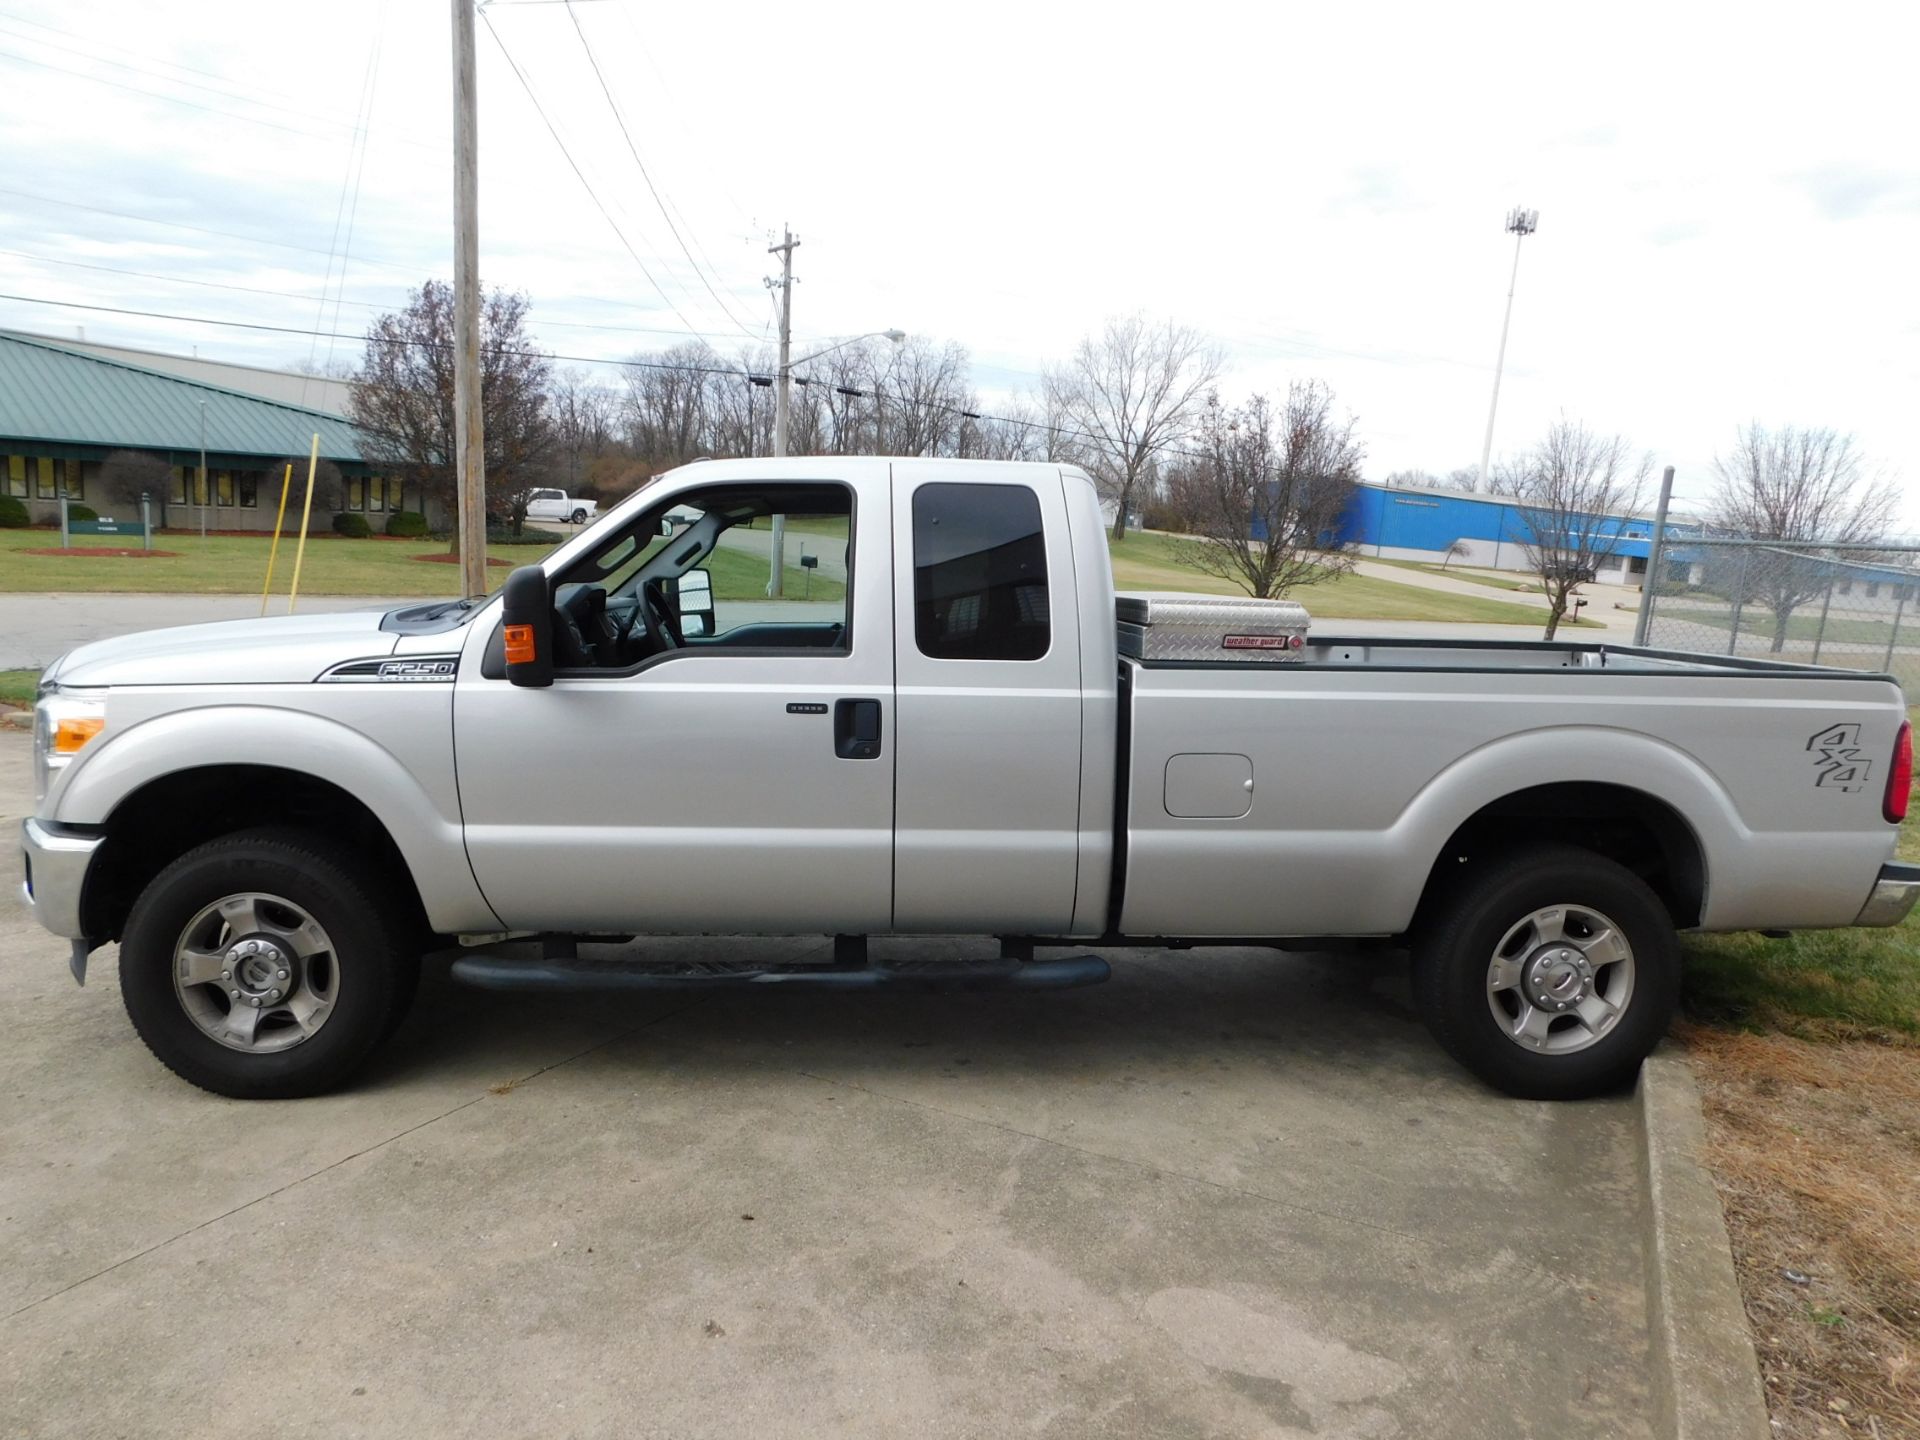 2016 Ford F-250 Super Duty Extended Cab Pick-Up Truck, VIN 1FT7X2B64GEC12260, 6.2 Litre Gas - Image 3 of 32